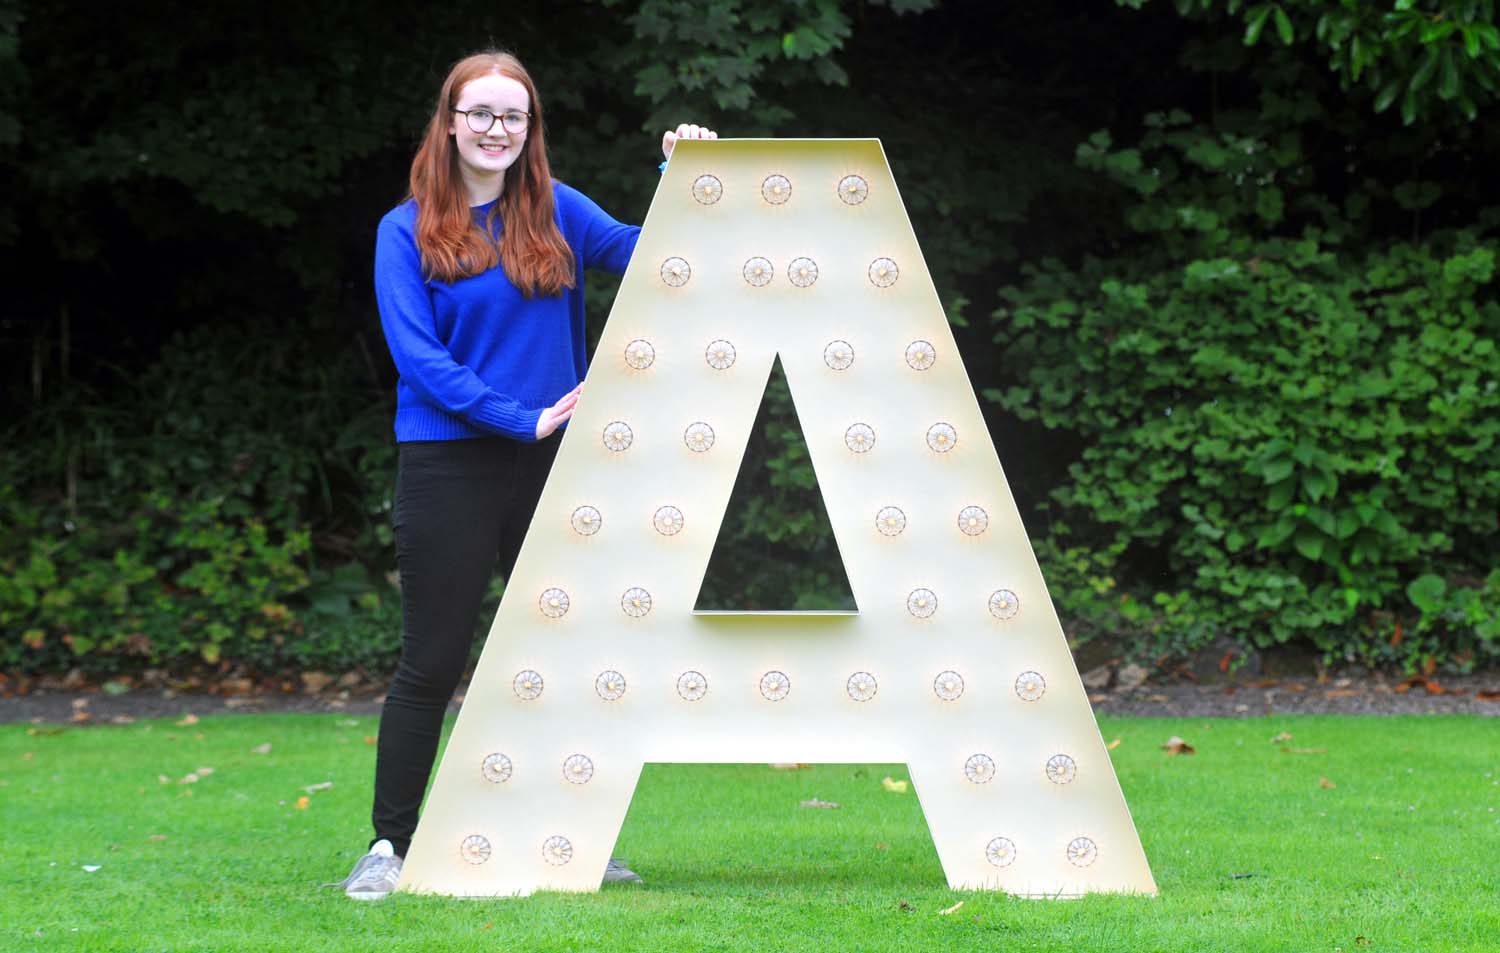 Harrogate Ladies’ College pupil, Jenny Claridge who has secured a place at Oxford University